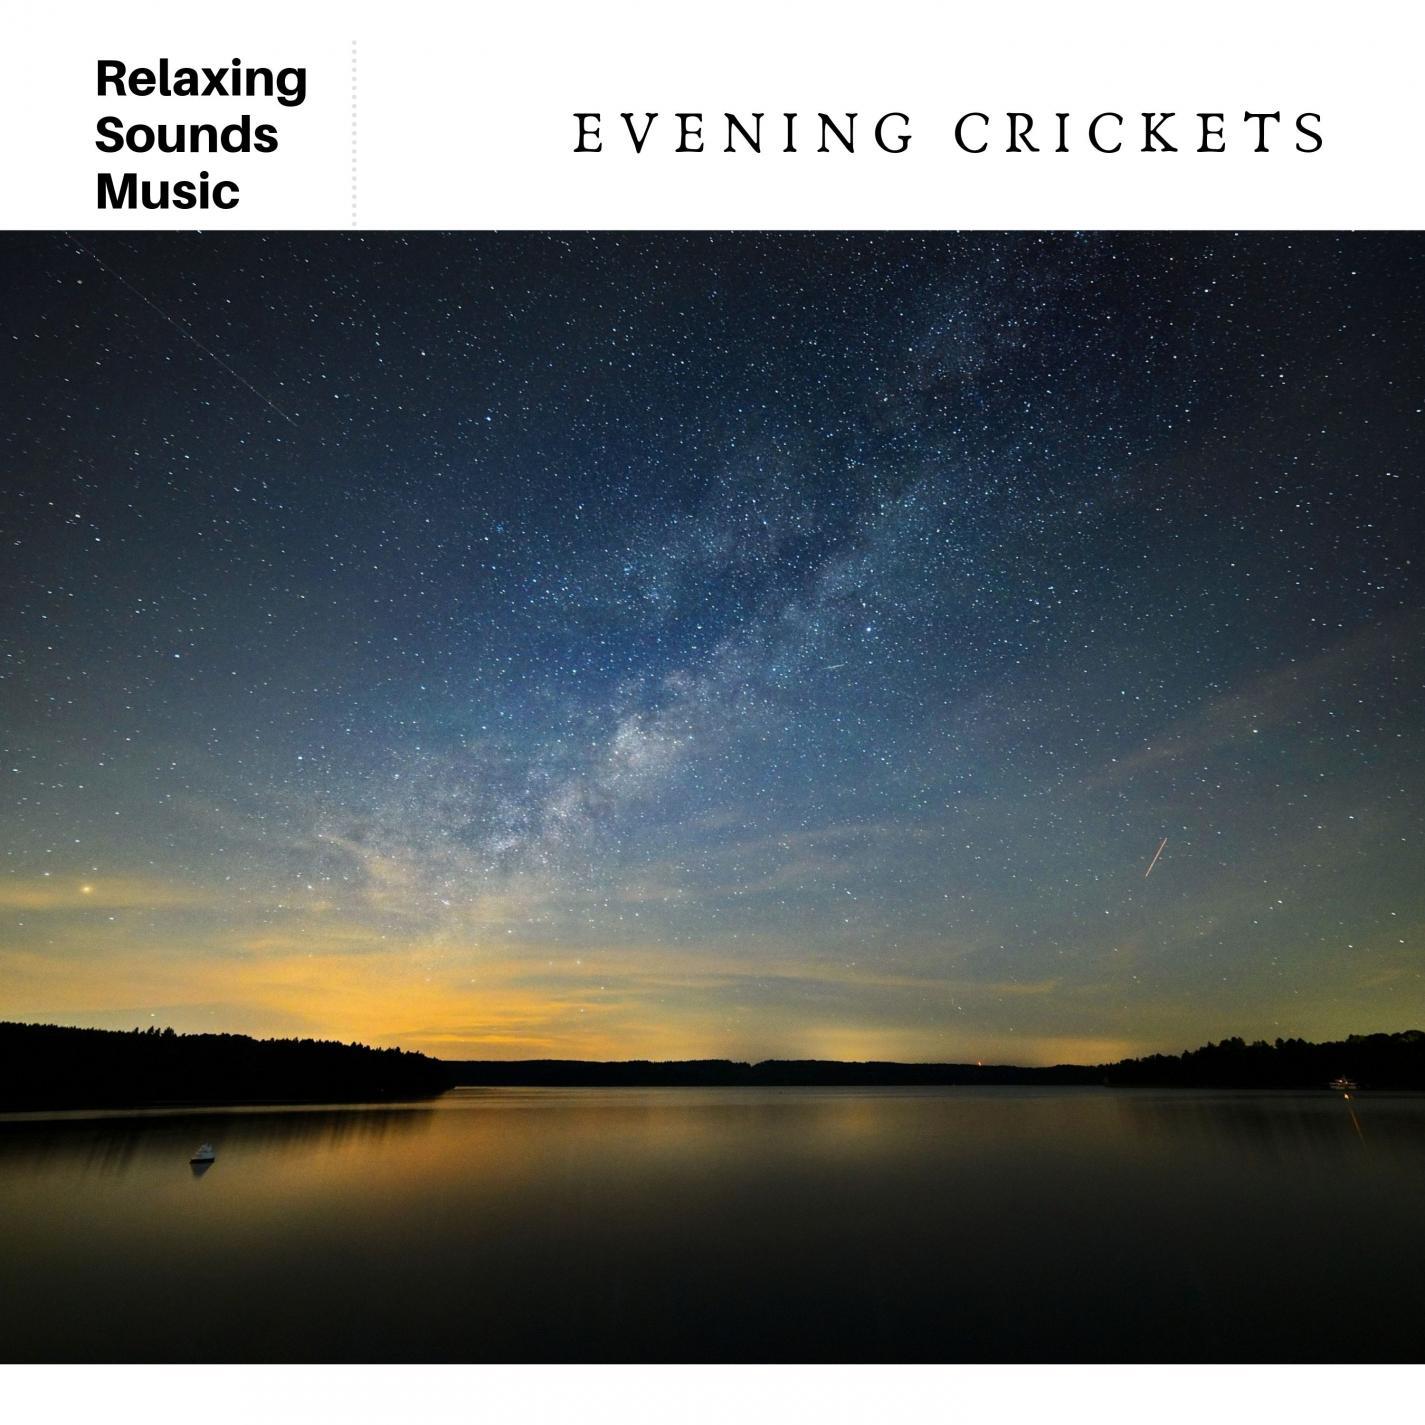 Cricket Sounds at Night